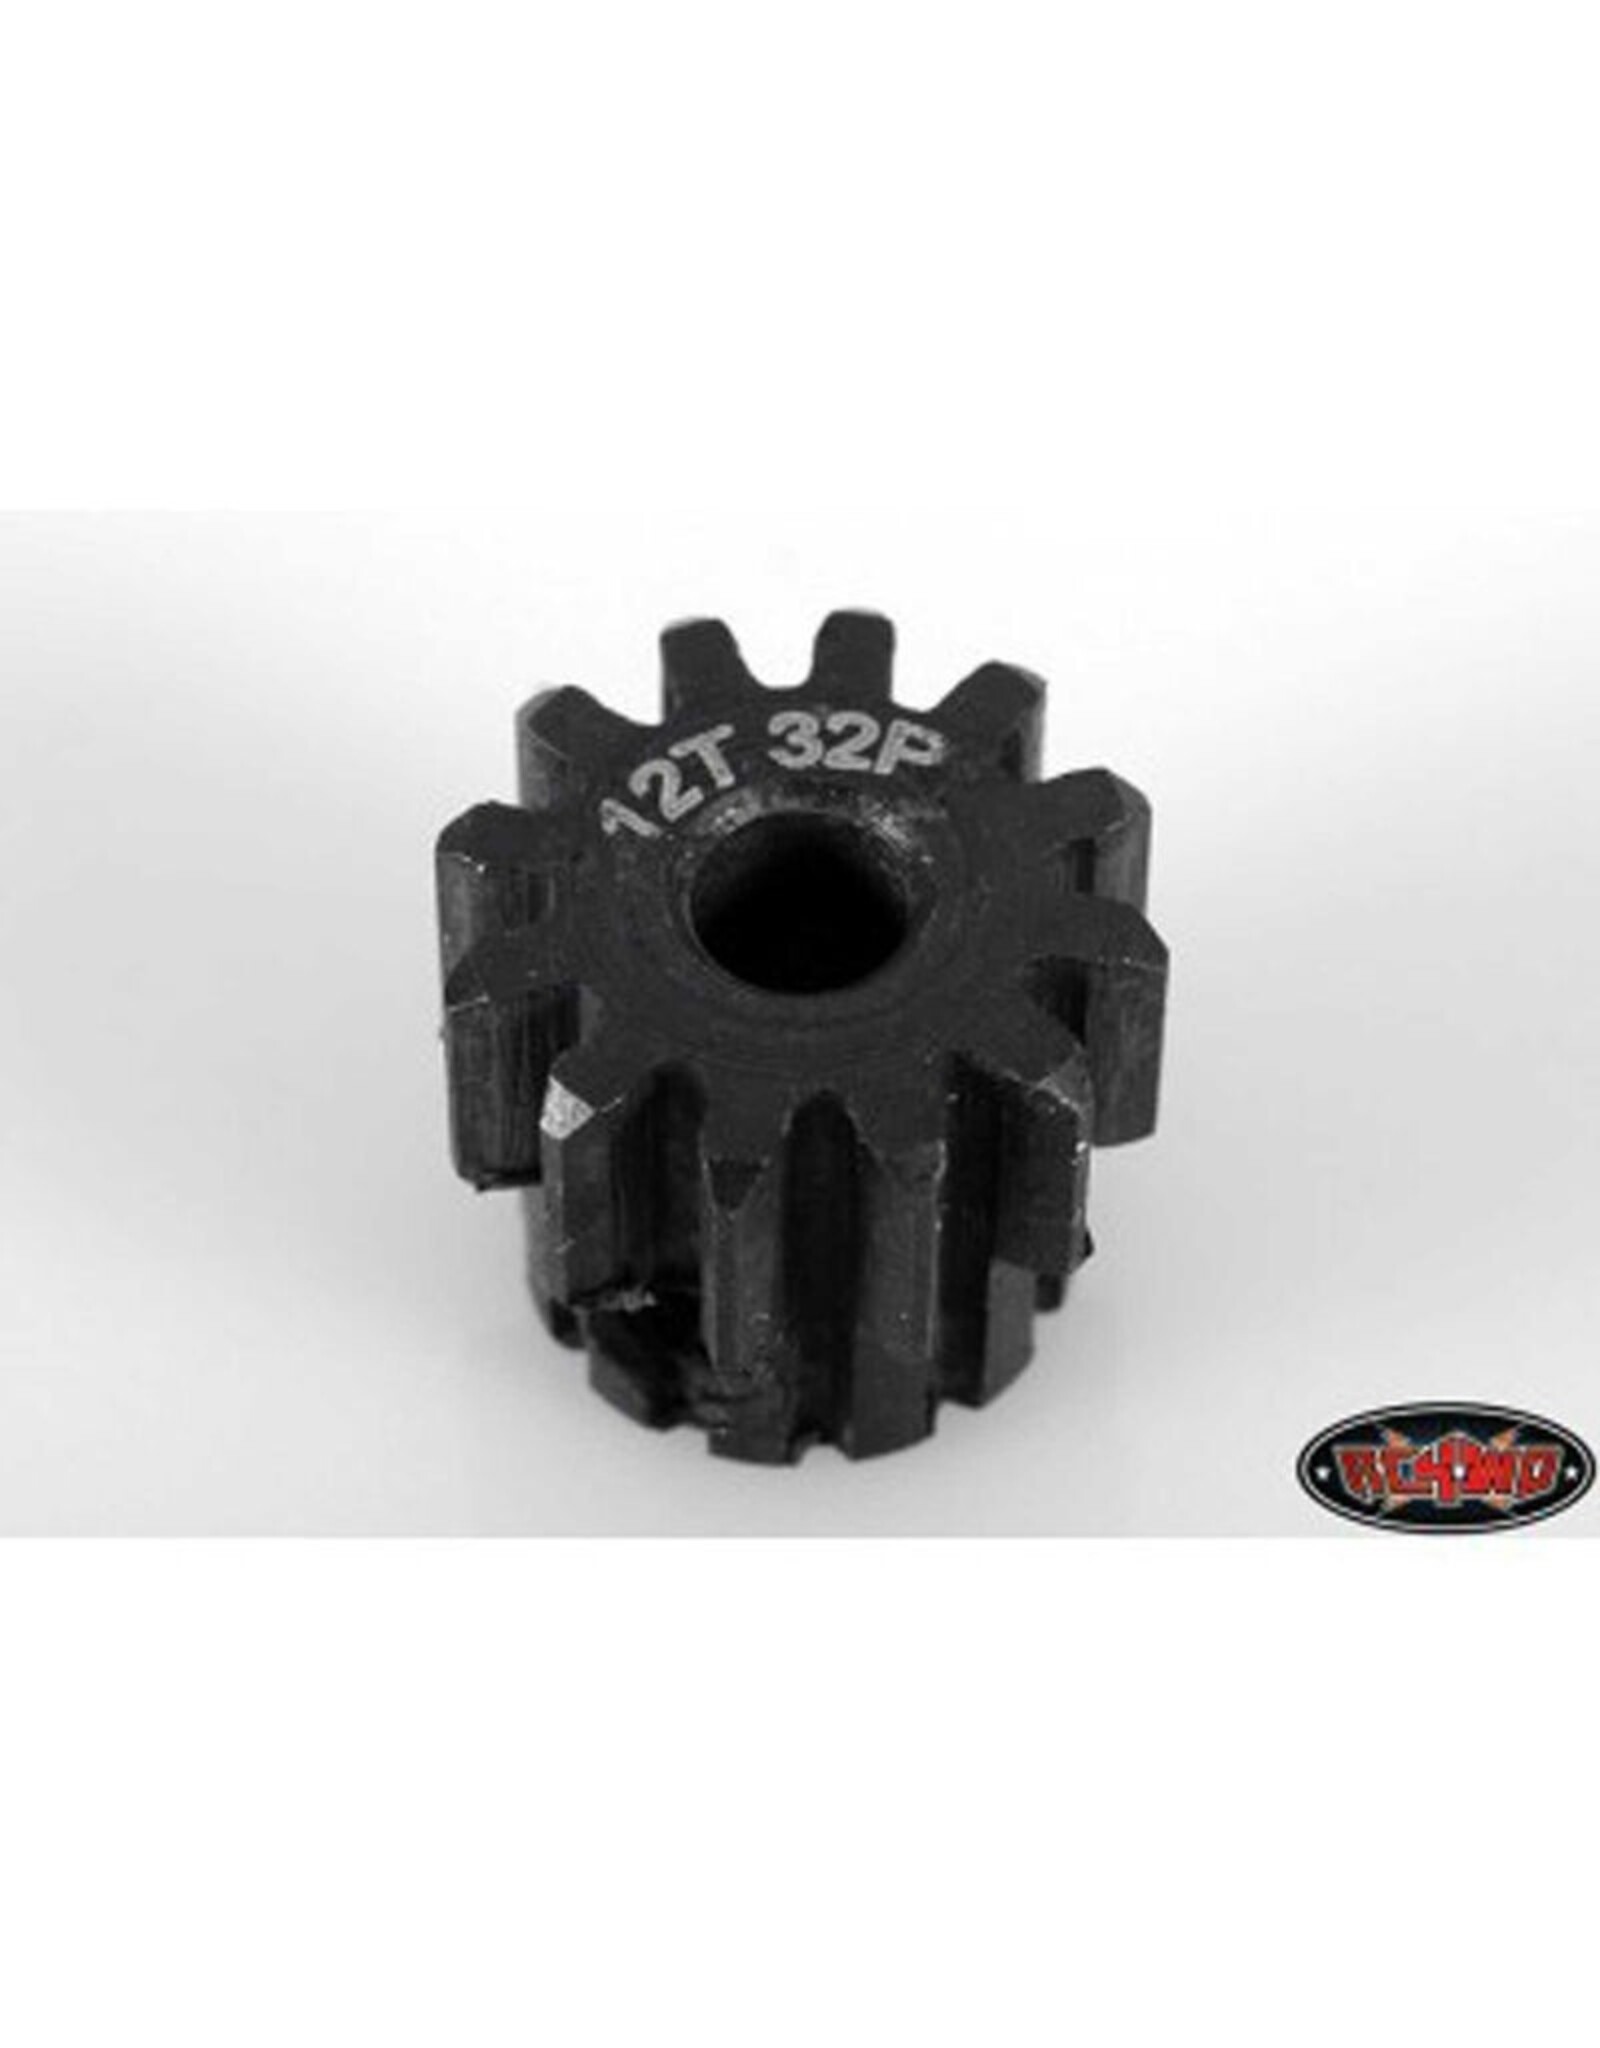 RC4WD RC4ZG0065 12t 32p Hardened Steel Pinion Gear